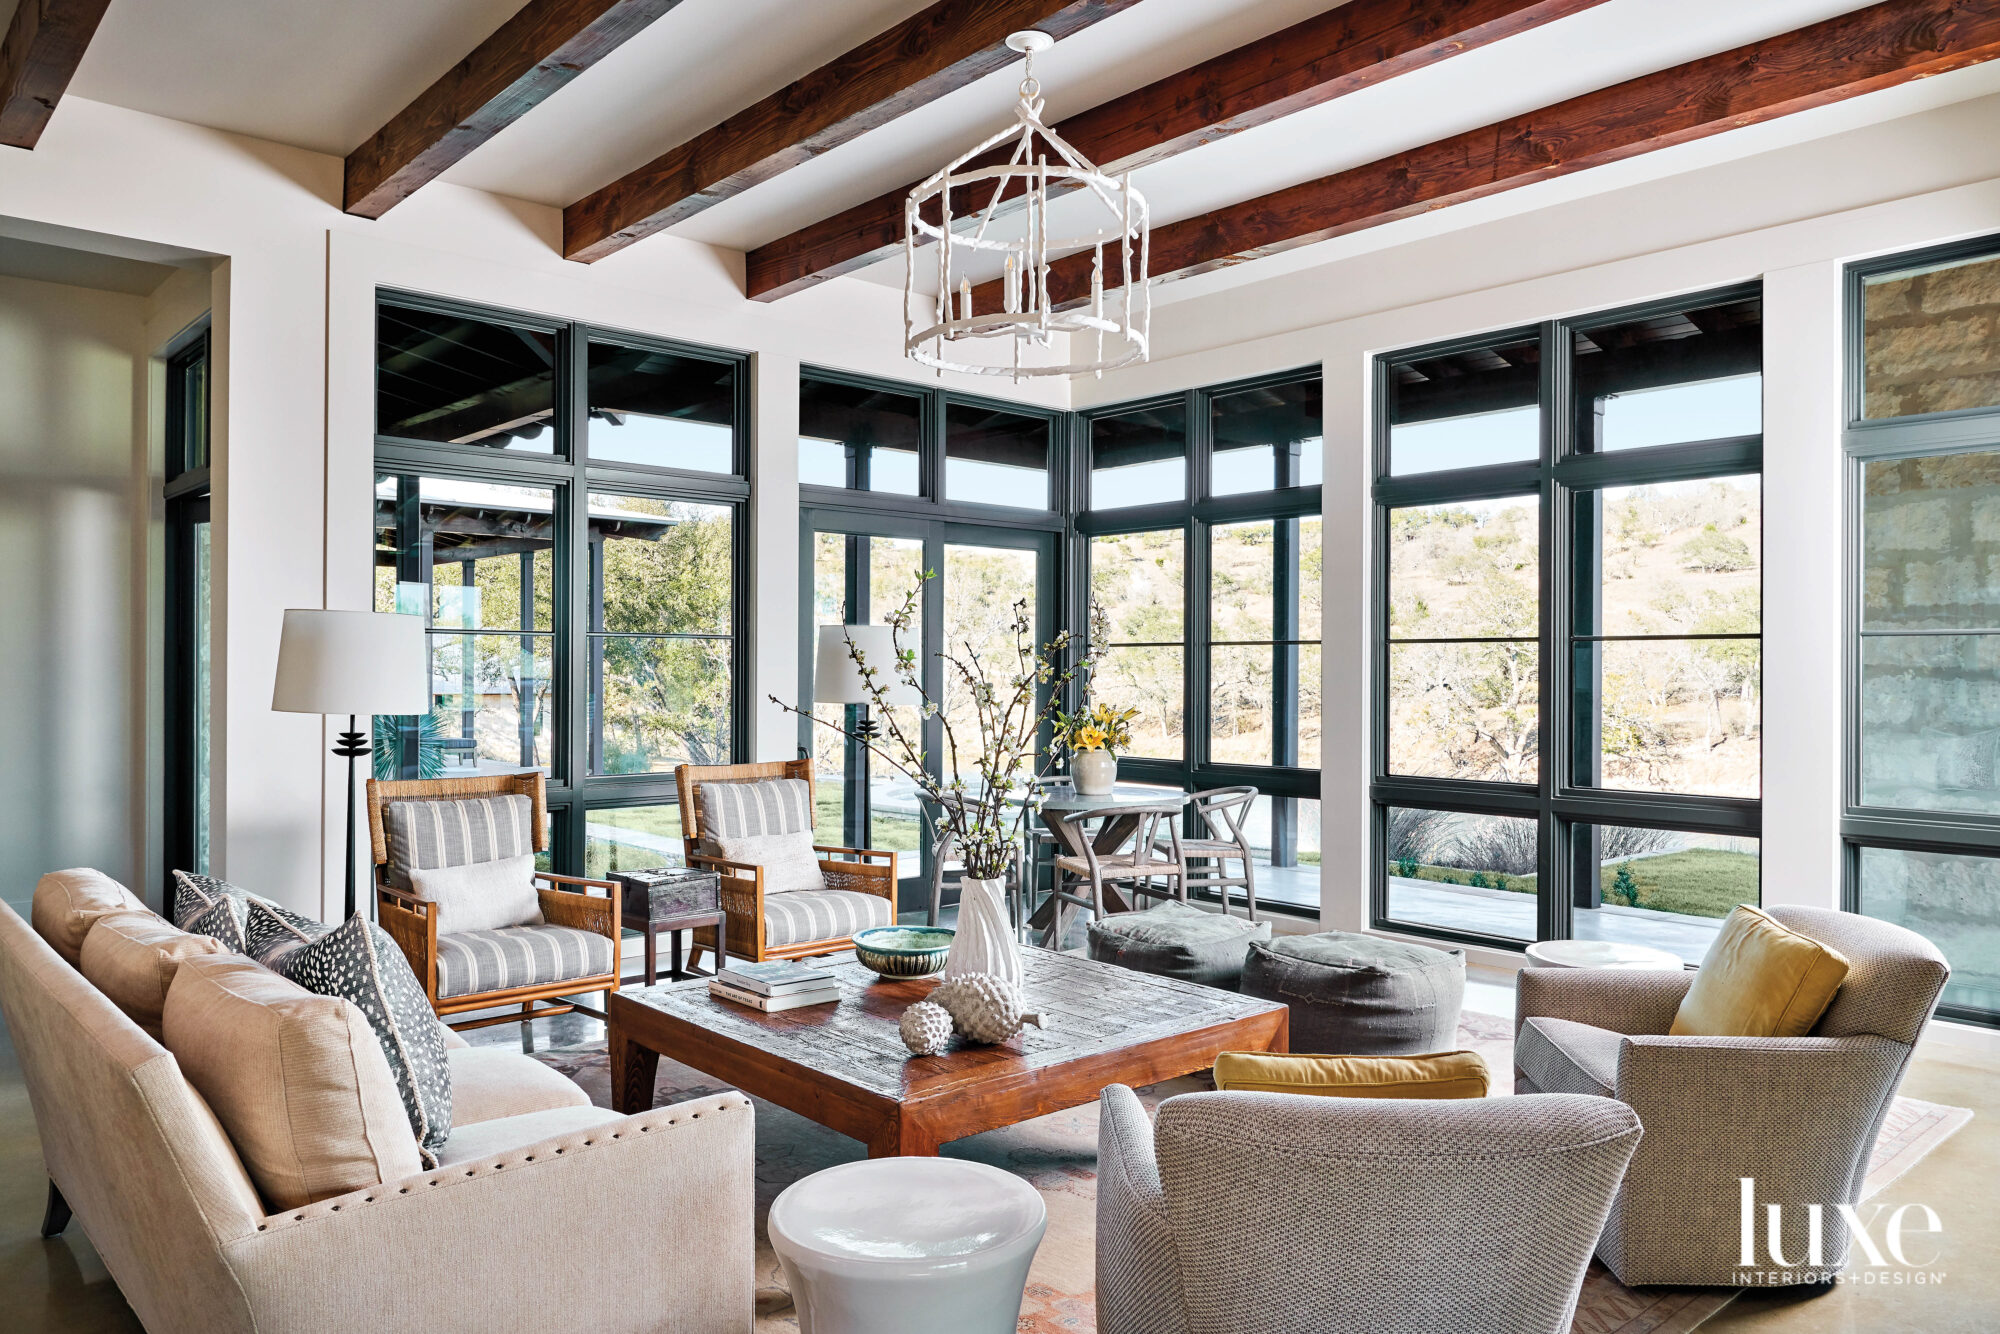 Great room seating area with expansive windows.